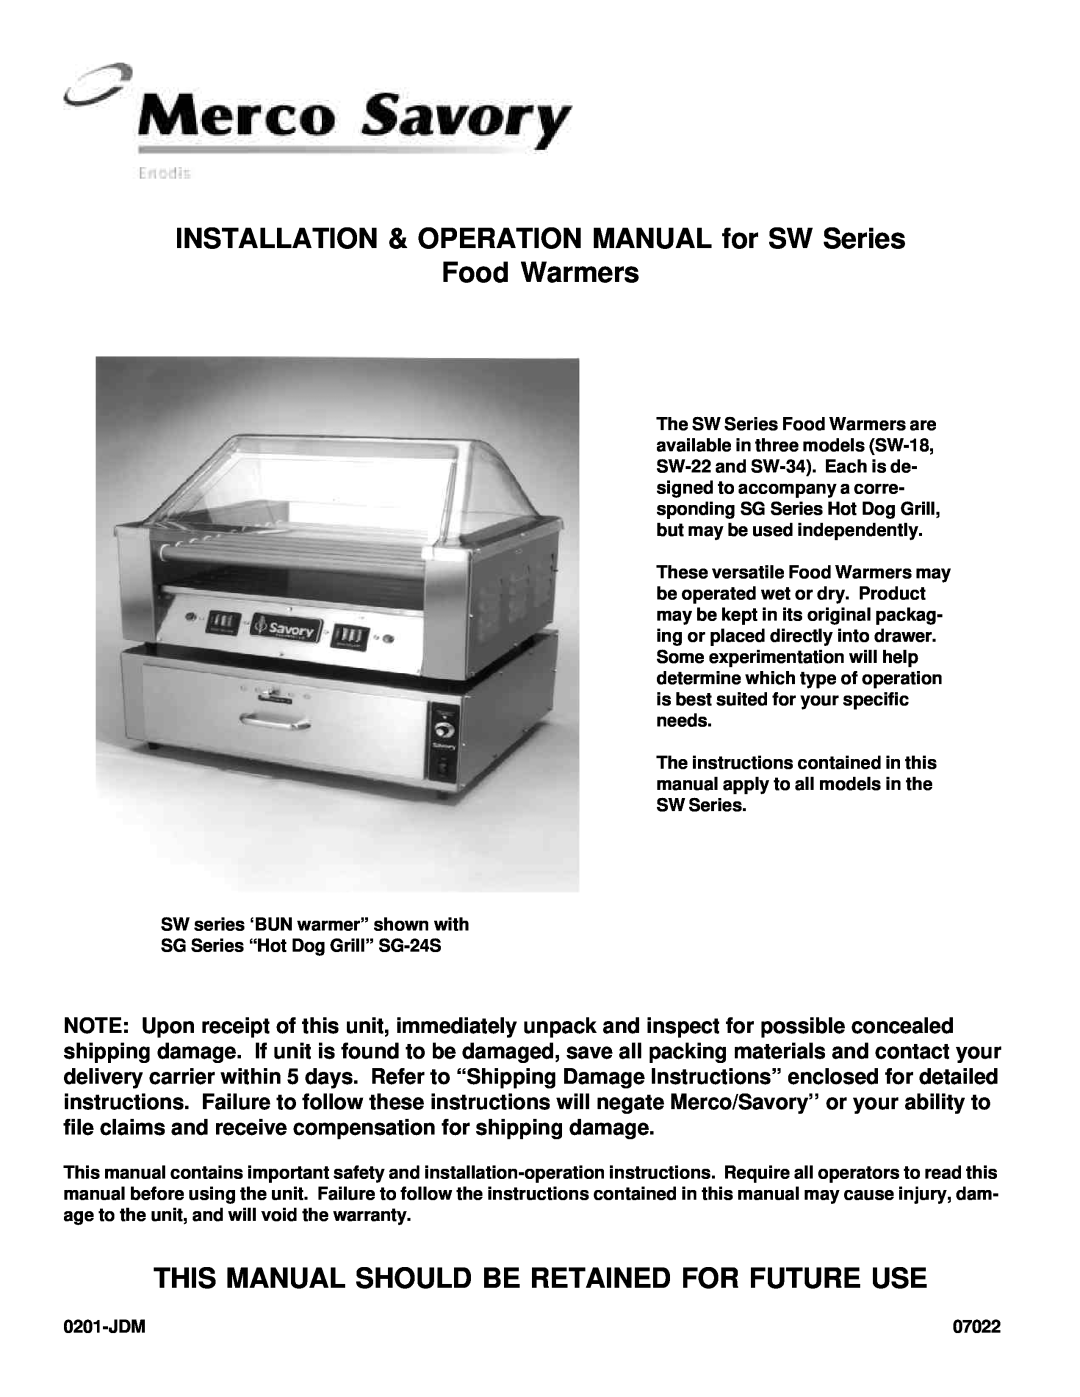 Merco Savory SW Series operation manual Food Warmers, This Manual Should Be Retained For Future Use 